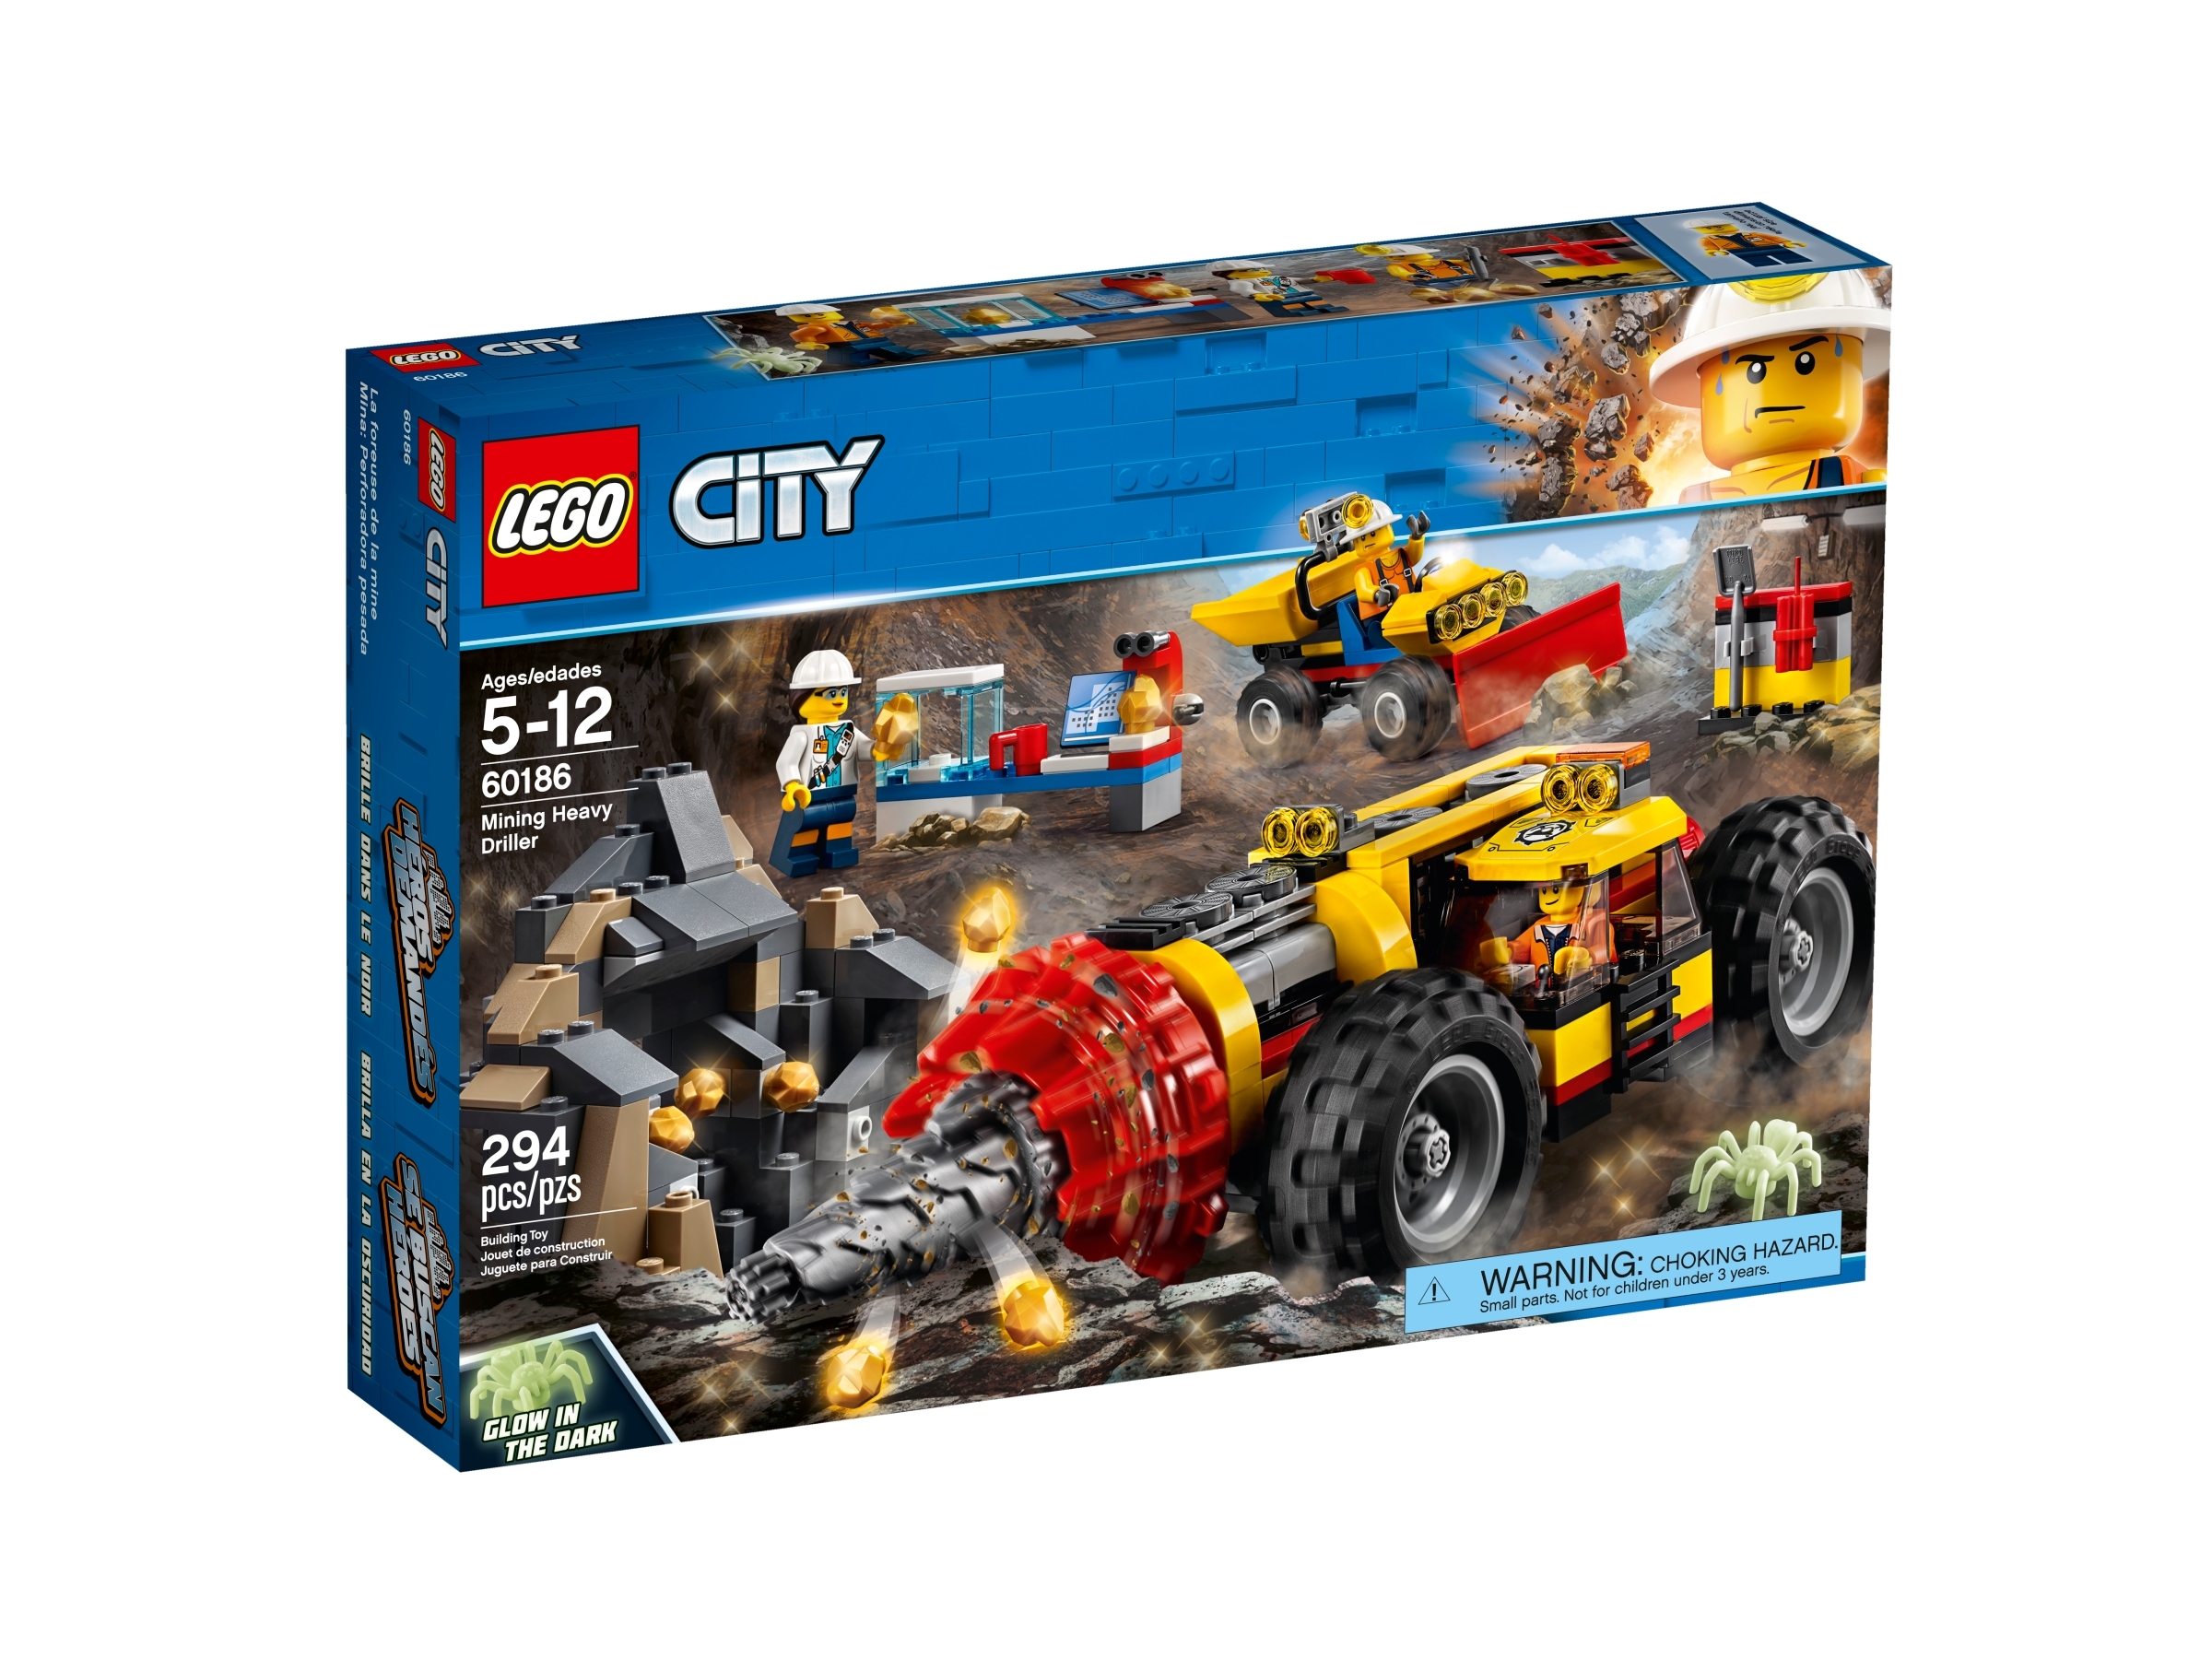 Mining Heavy Driller | City | Buy online at the Official LEGO® Shop US